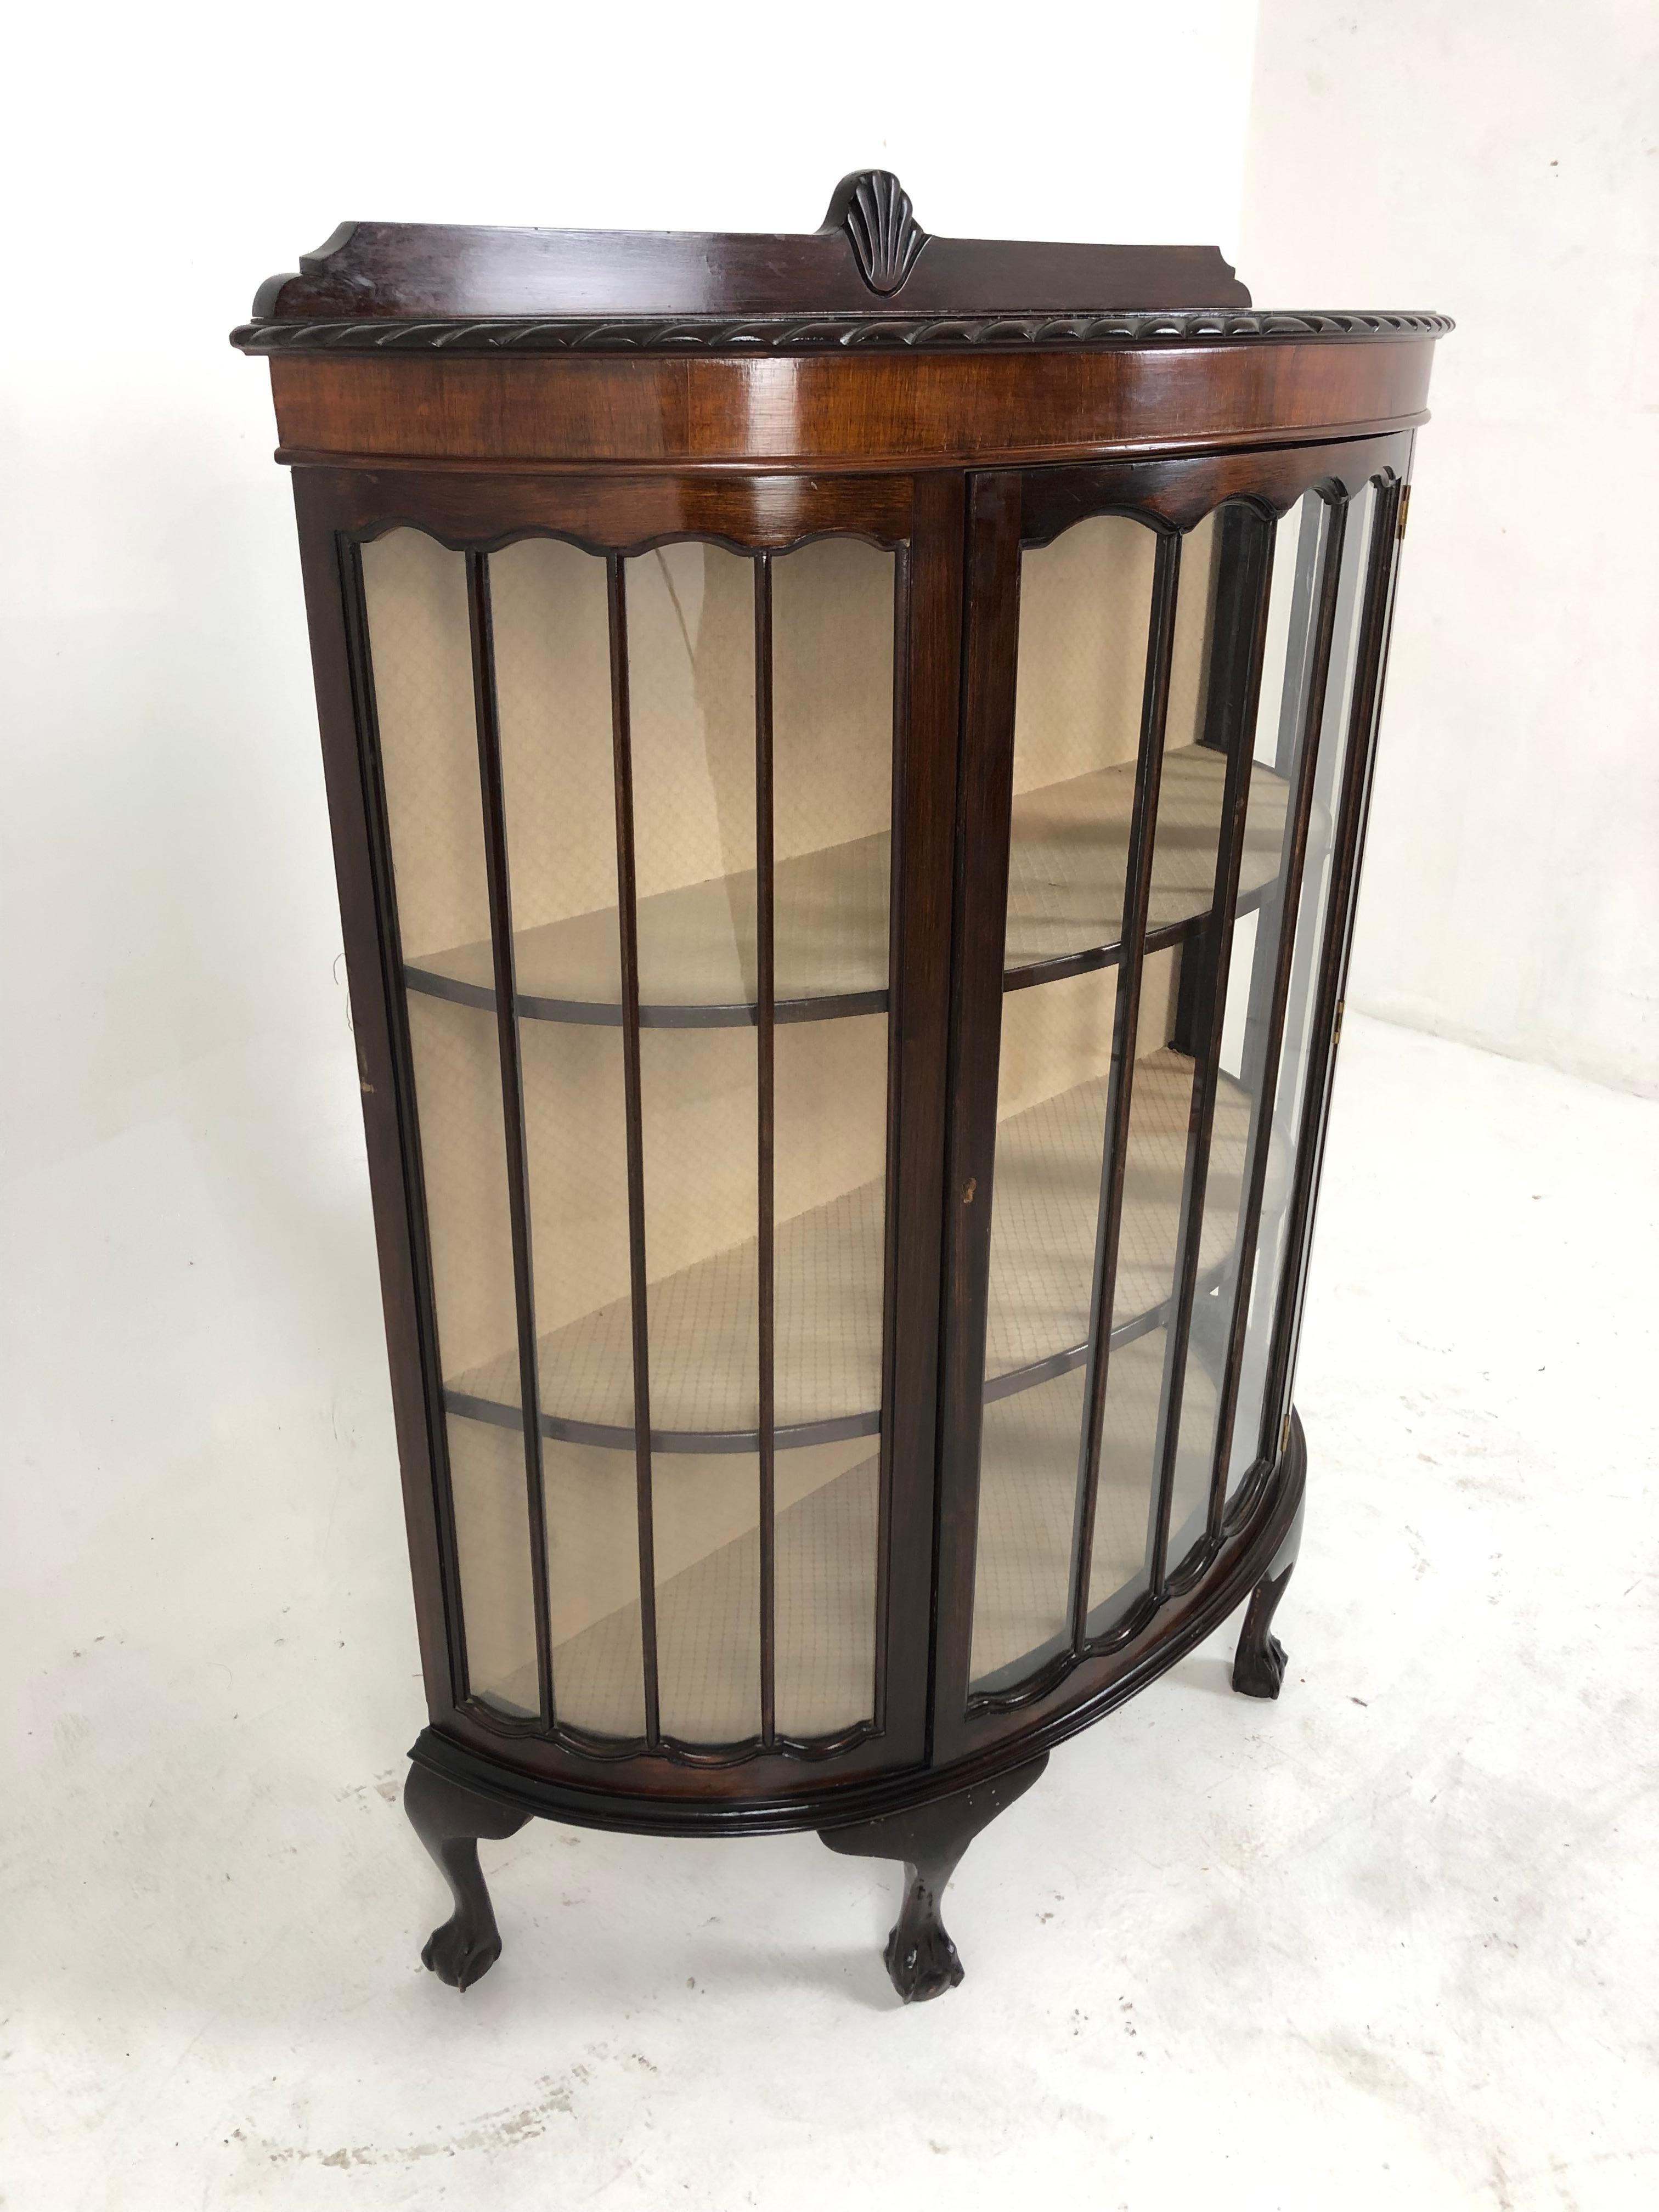 Antique walnut bow front china cabinet, display cabinet, Scotland 1920, H862

Scotland 1920
Solid Walnut and Veneer 
Original finish
Carved Pediment on top
Bow front with pie crust edge
Single glass door with 2 fixed shelves
Interior back and